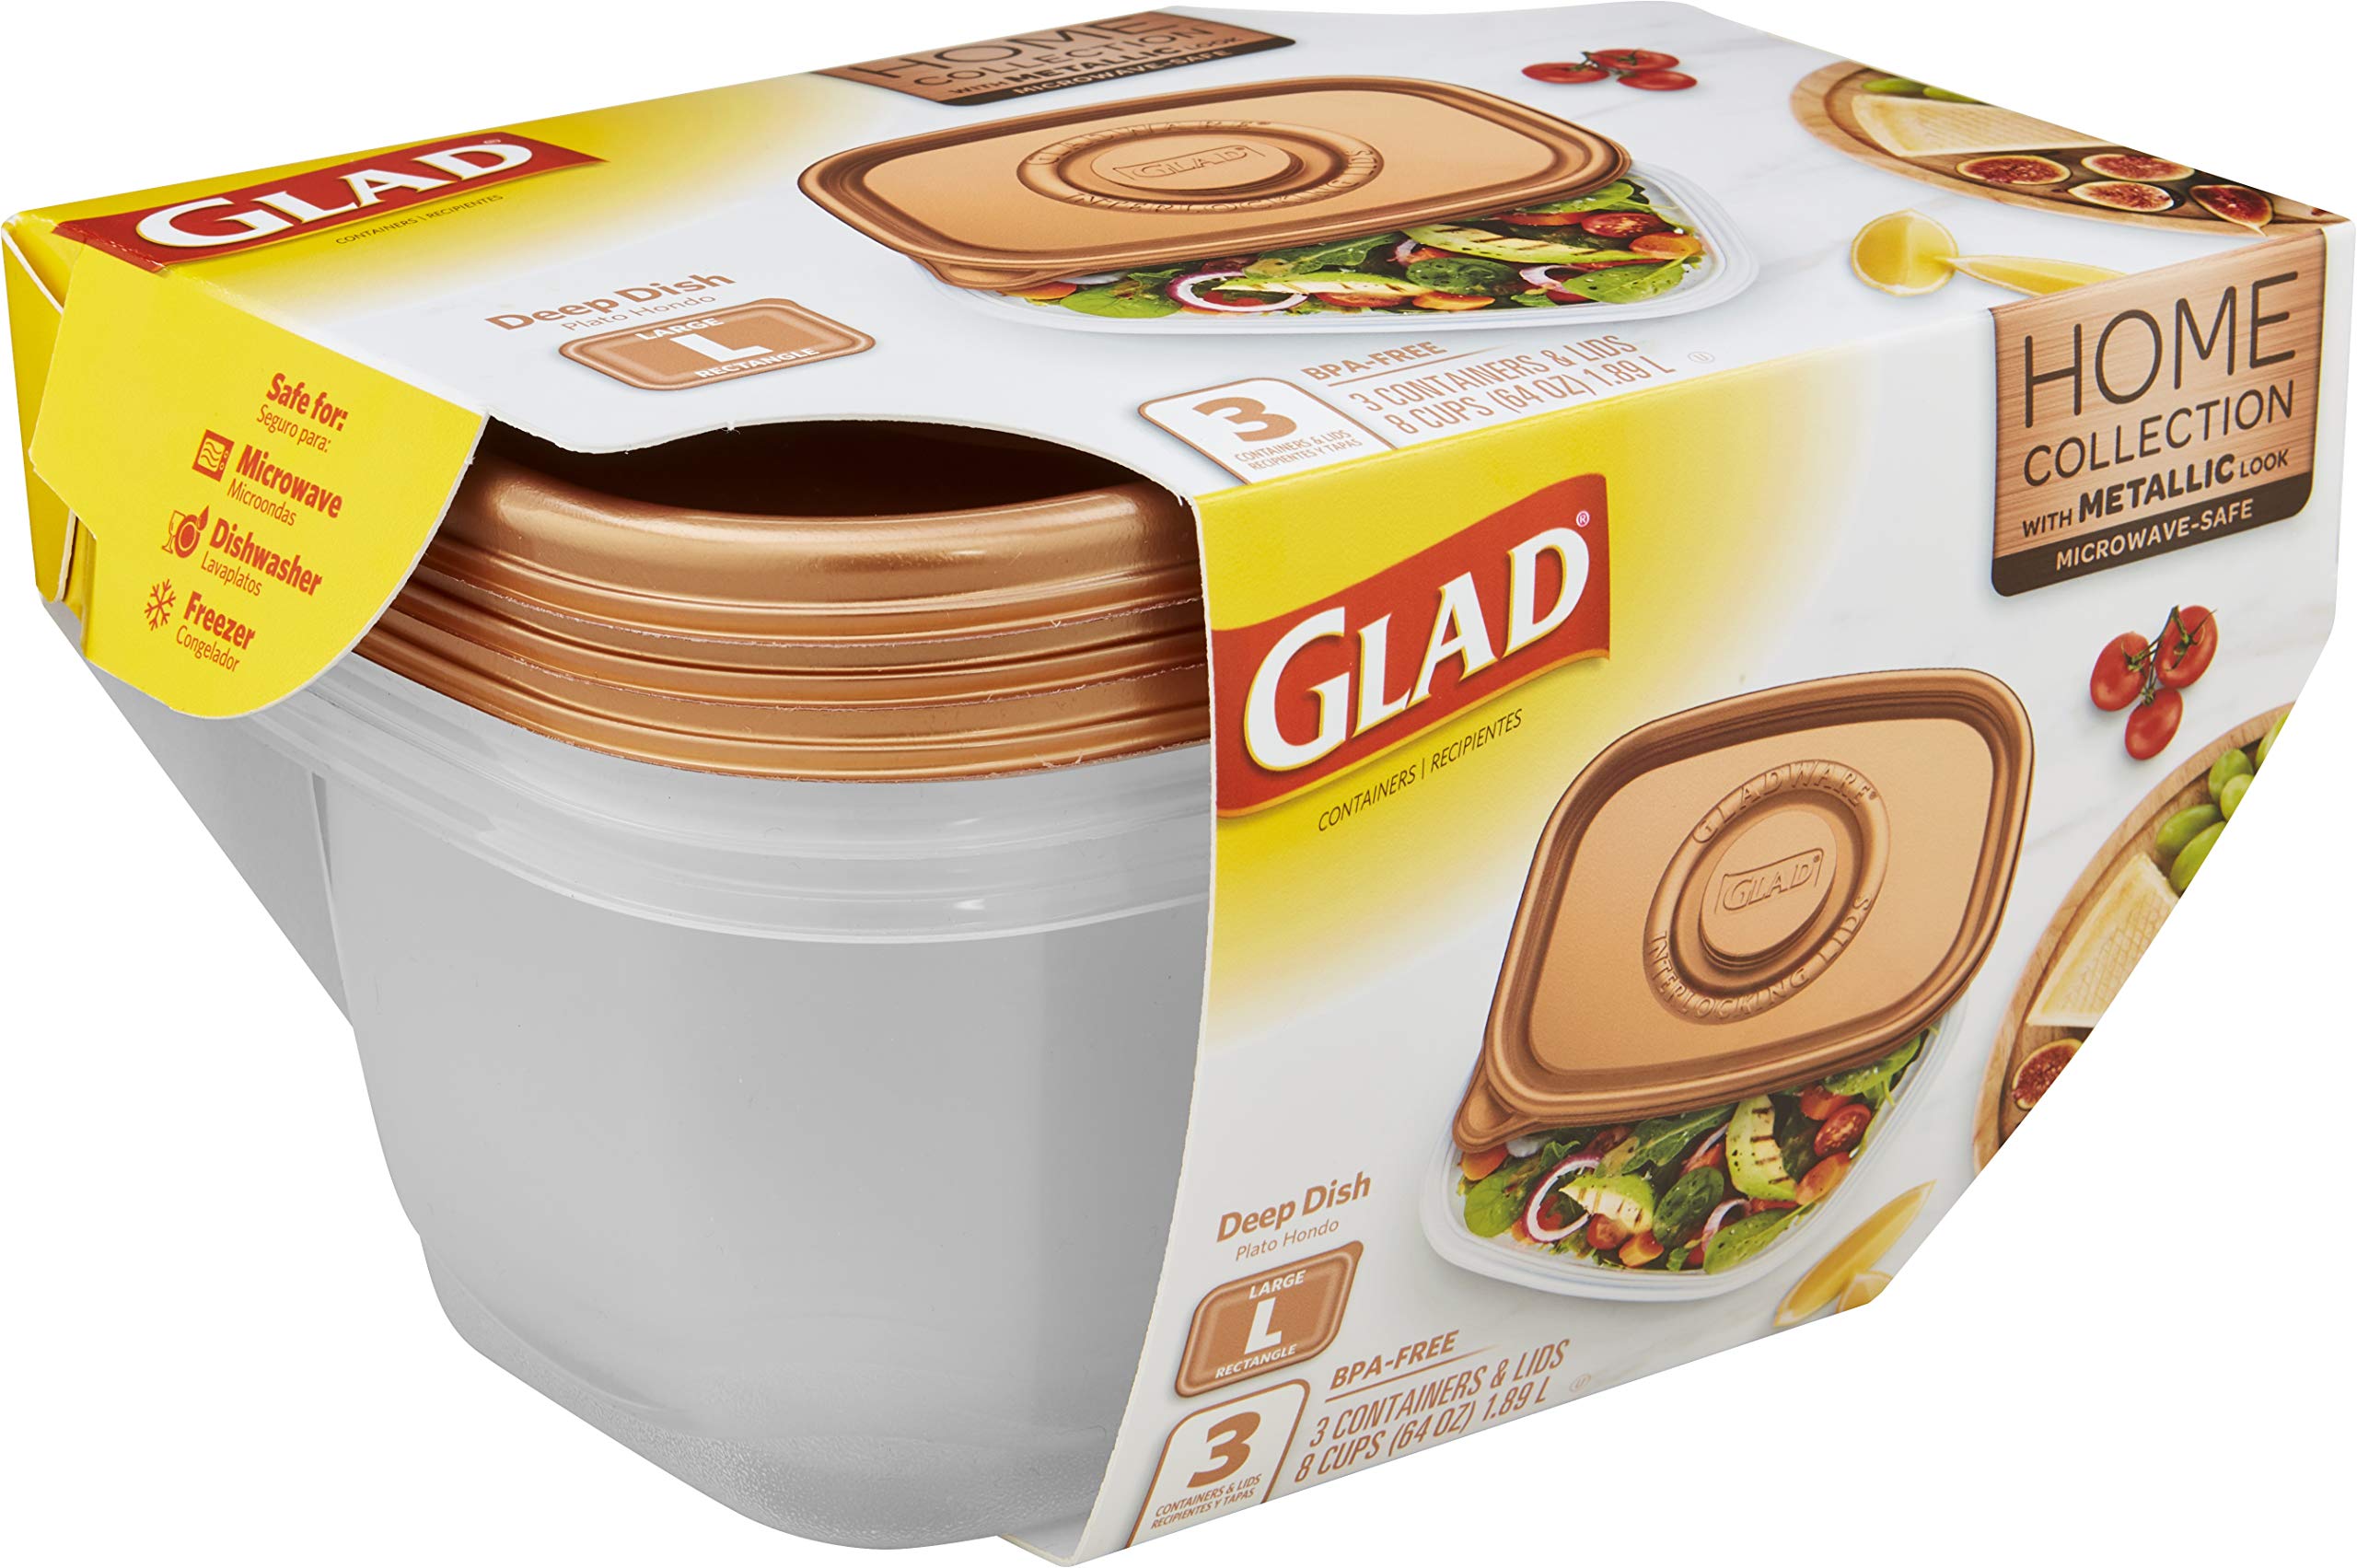 GladWare Home Deep Dish Food Storage Containers, Large Rectangle Holds 64 Ounces of Food, 3 Count Set | With Glad Lock Tight Seal, BPA Free Containers and Lids (4 Pack)